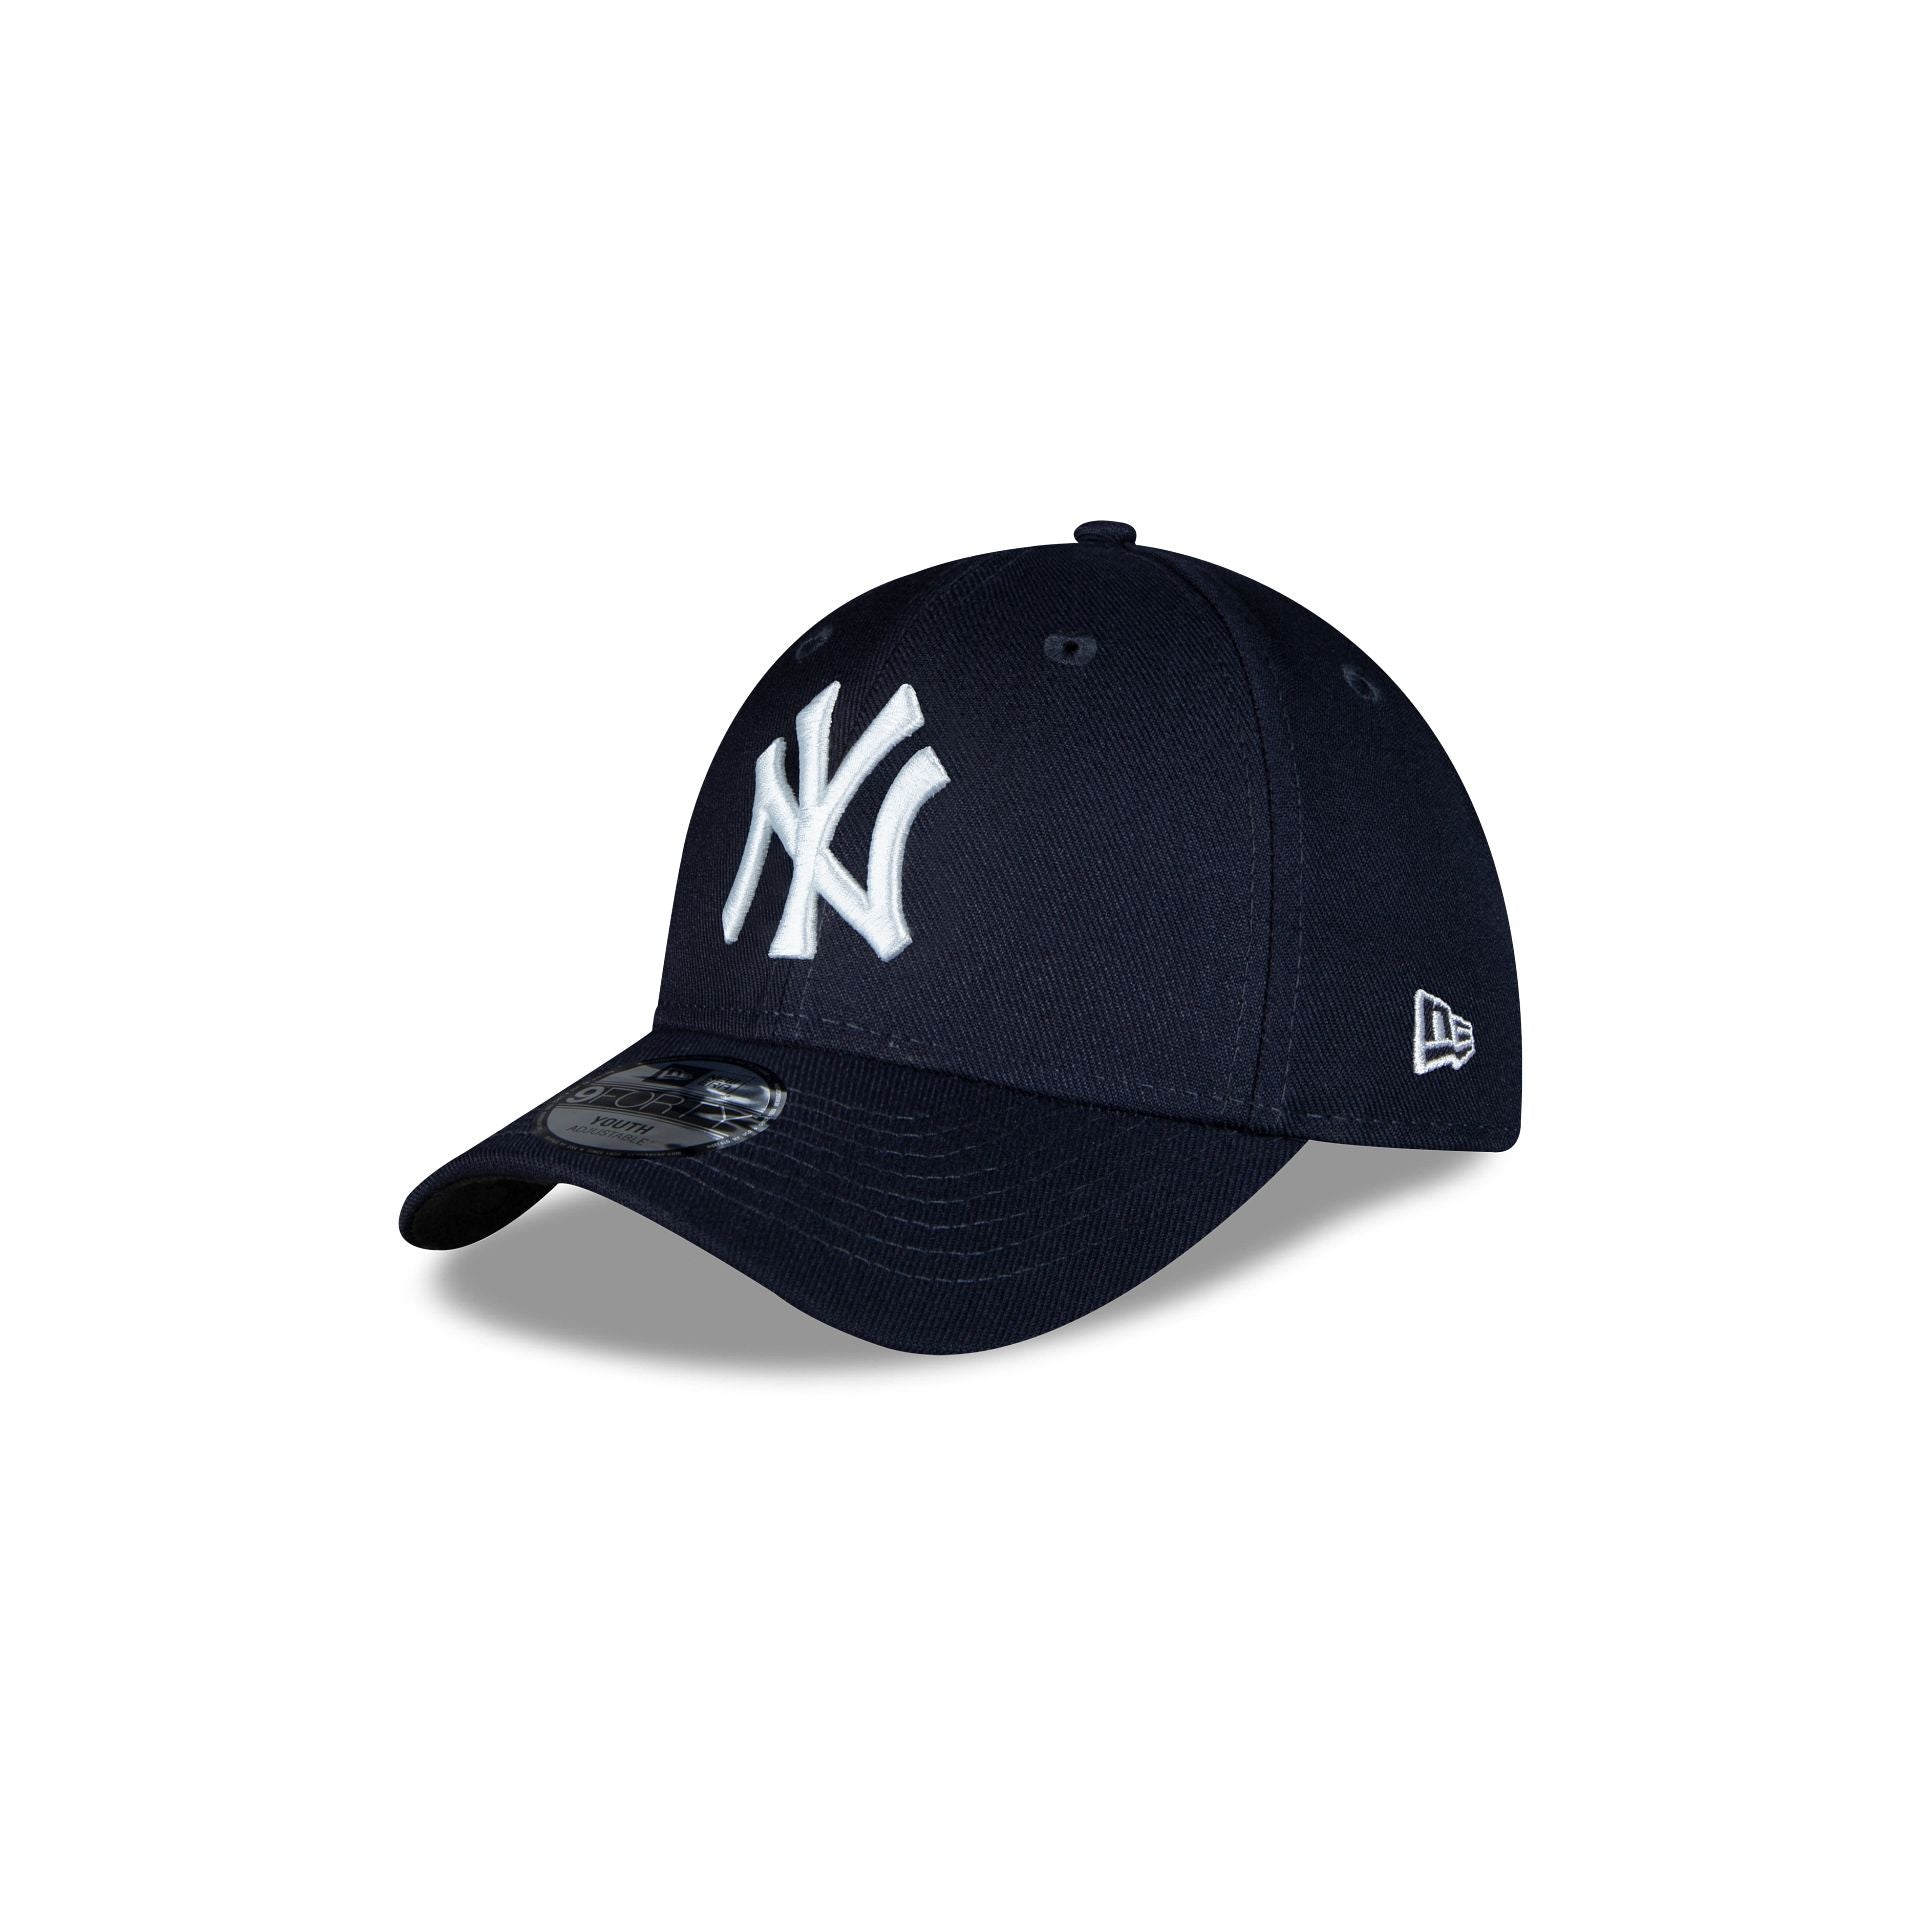 Era Yankees Adjustable League Kids York New Cap – Hat 9FORTY The New